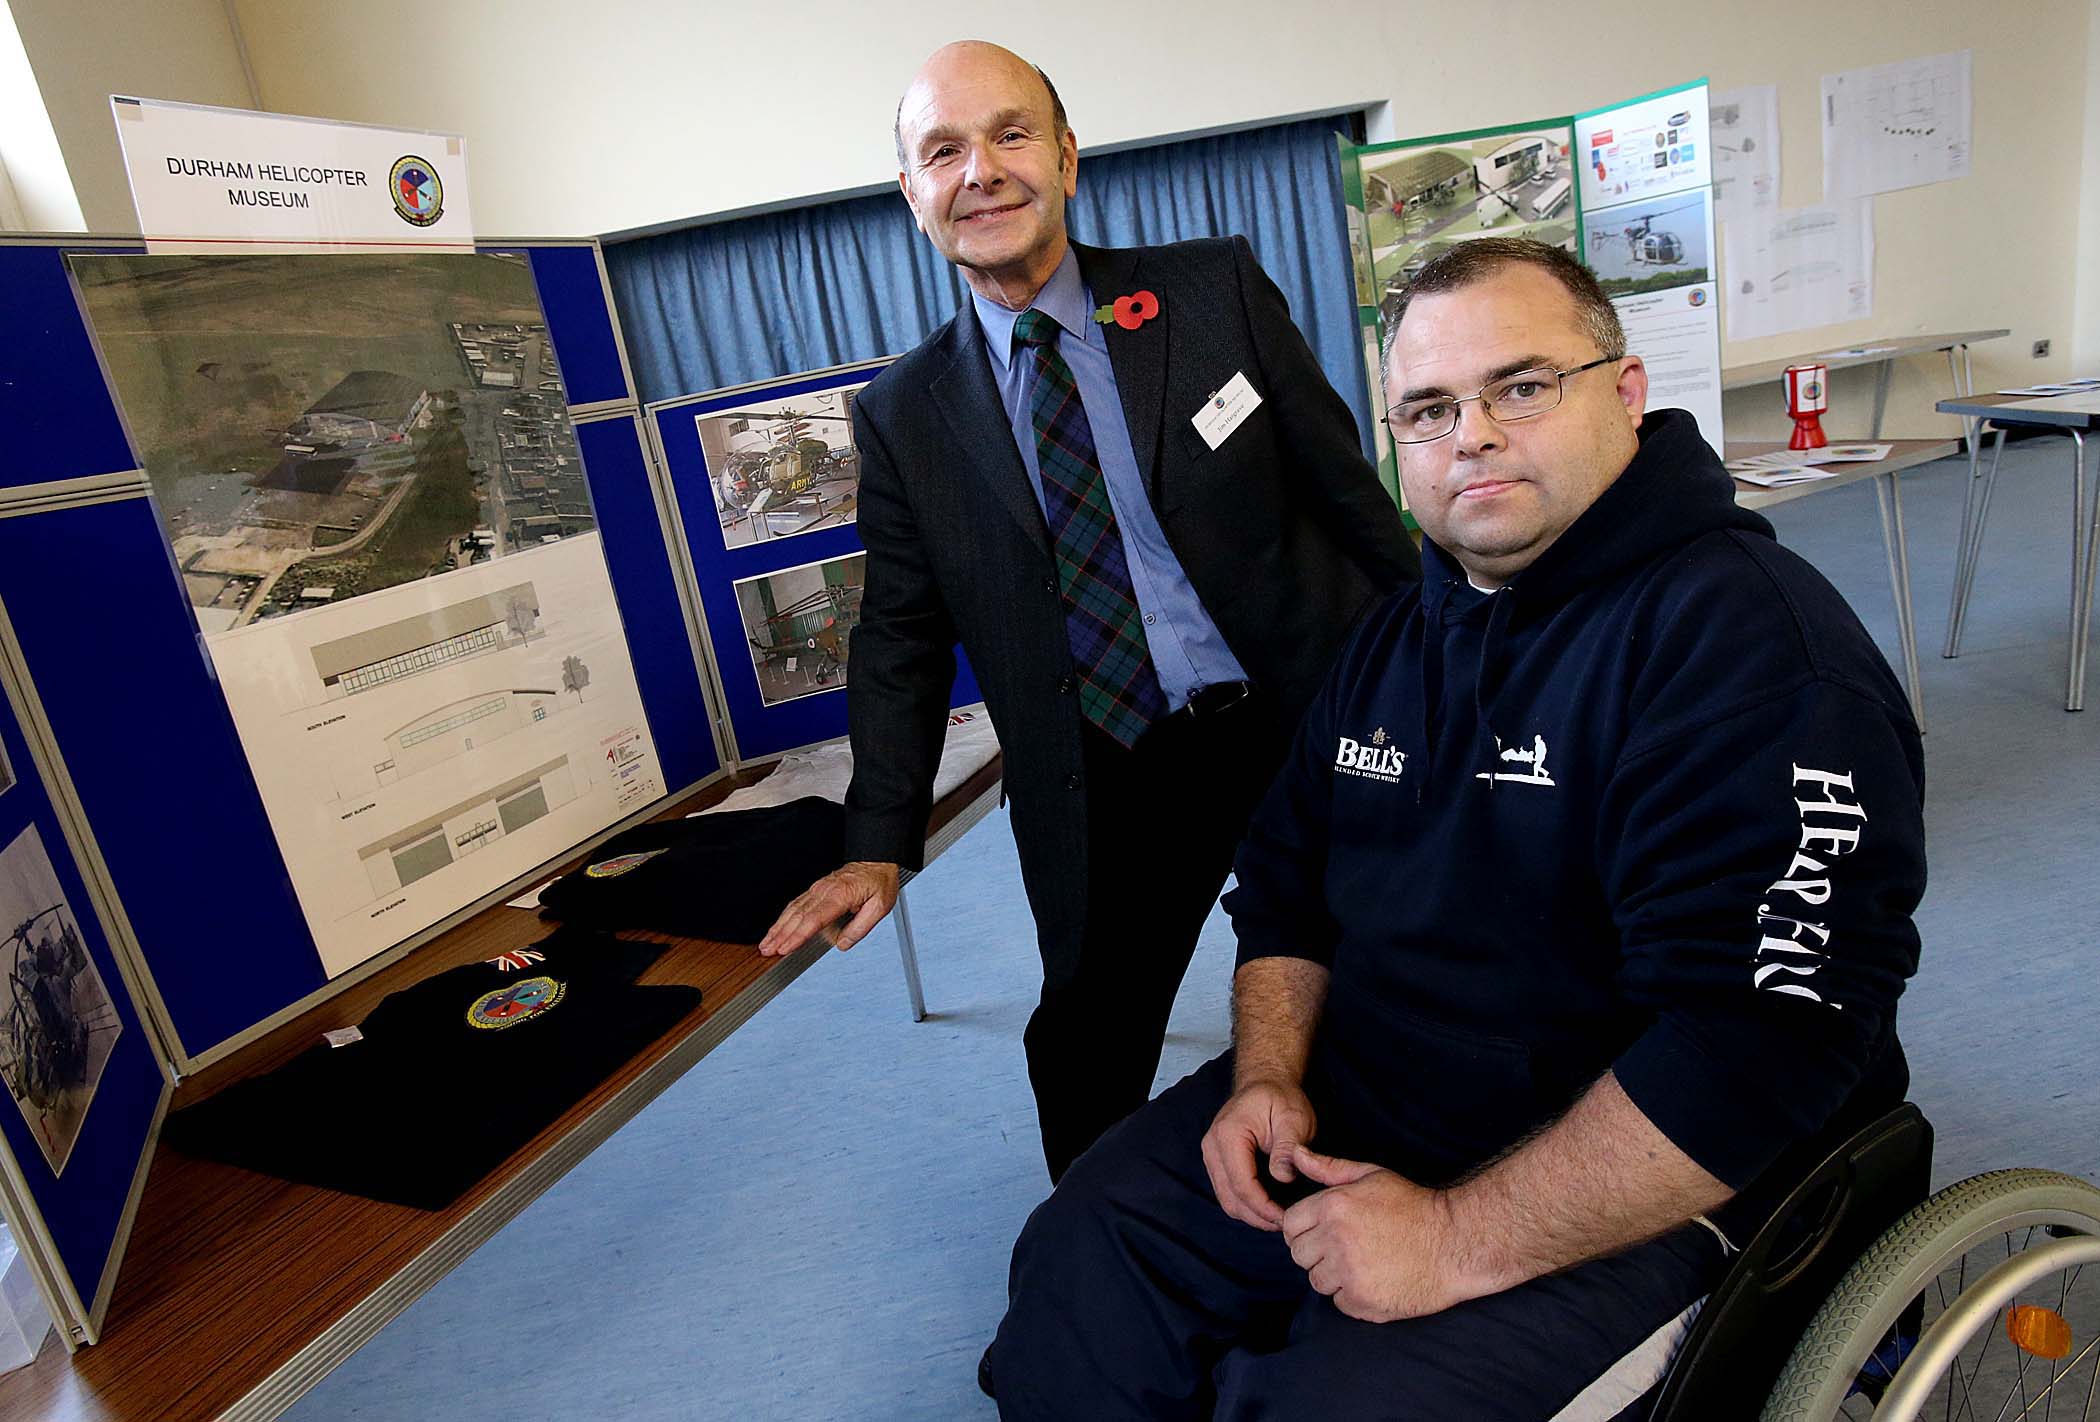 Director Duncan Moyes (front) and project development manager James Hargrave from Durham Helicopter Museum attend the event at Shotton Community Centre